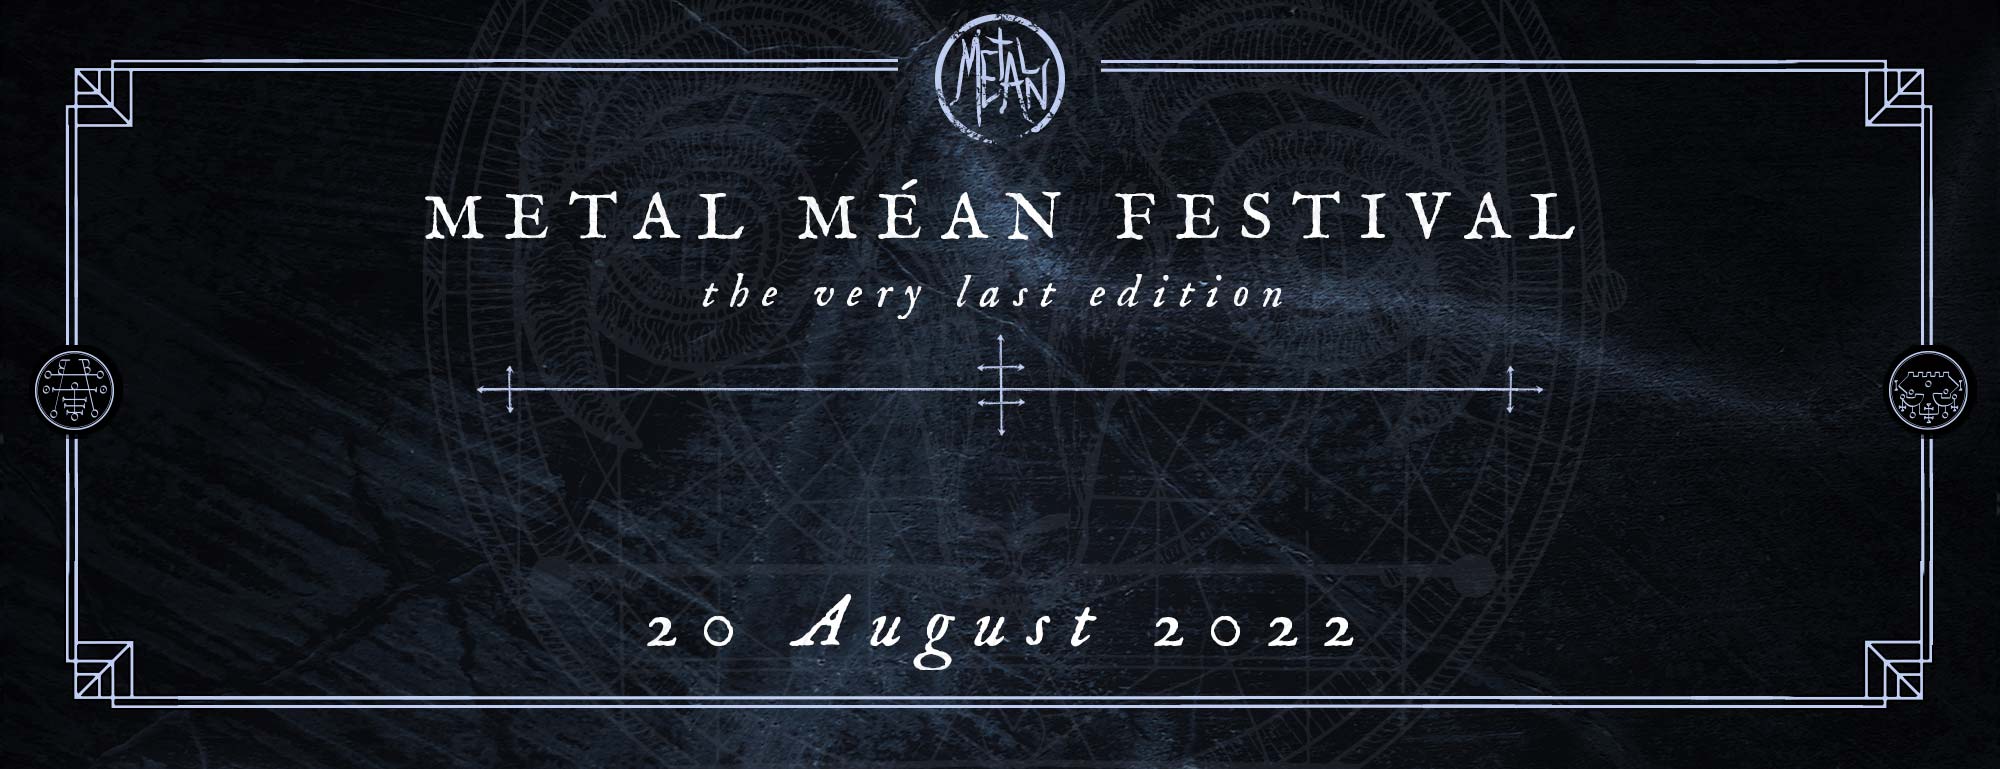 Metal Mean 2022 - the very last edition